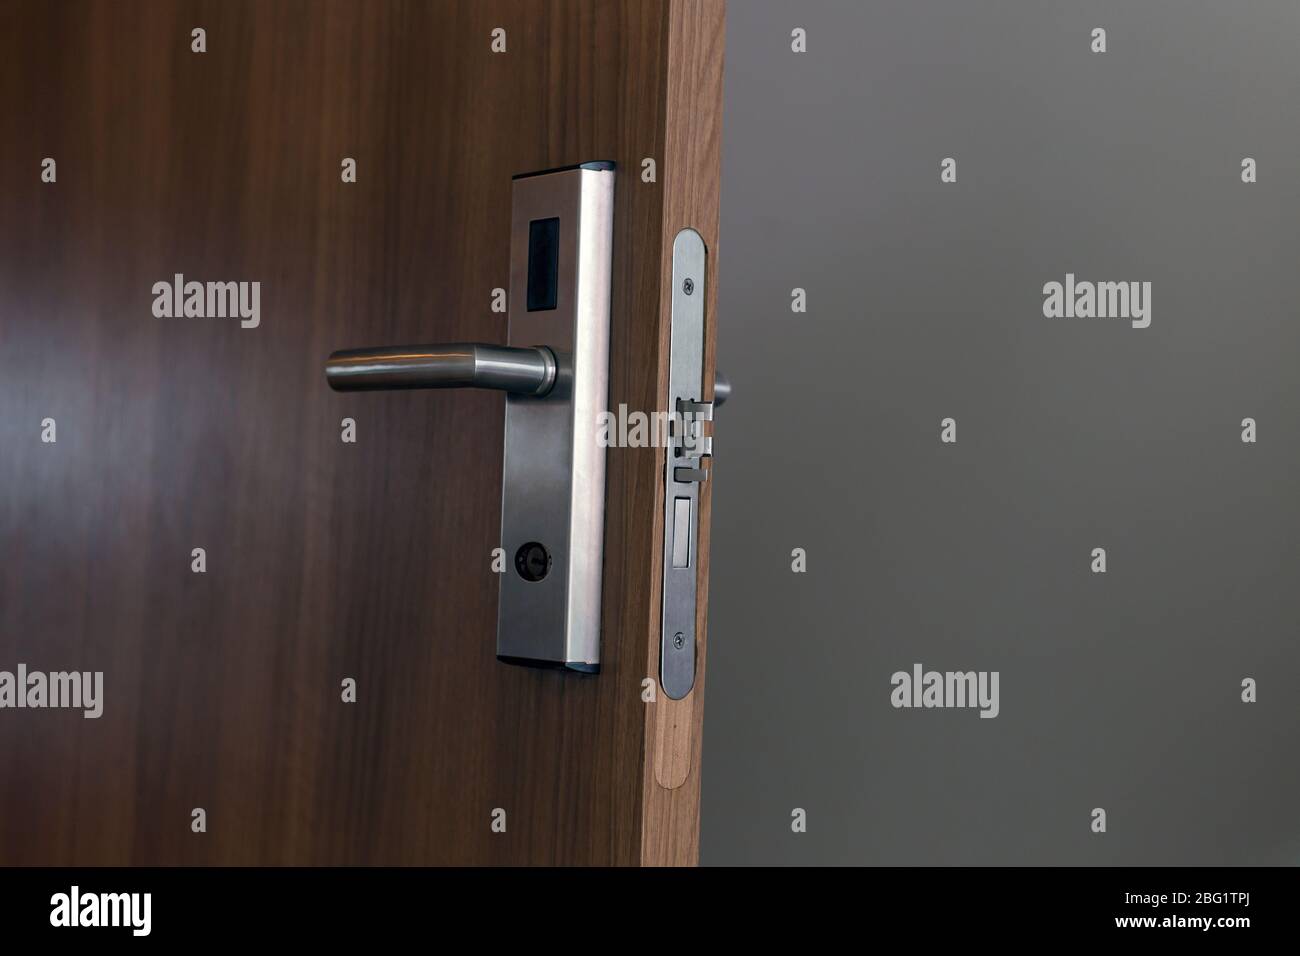 Wooden door with electronic lock. Close up view. Hotel key card door lock system. Stock Photo